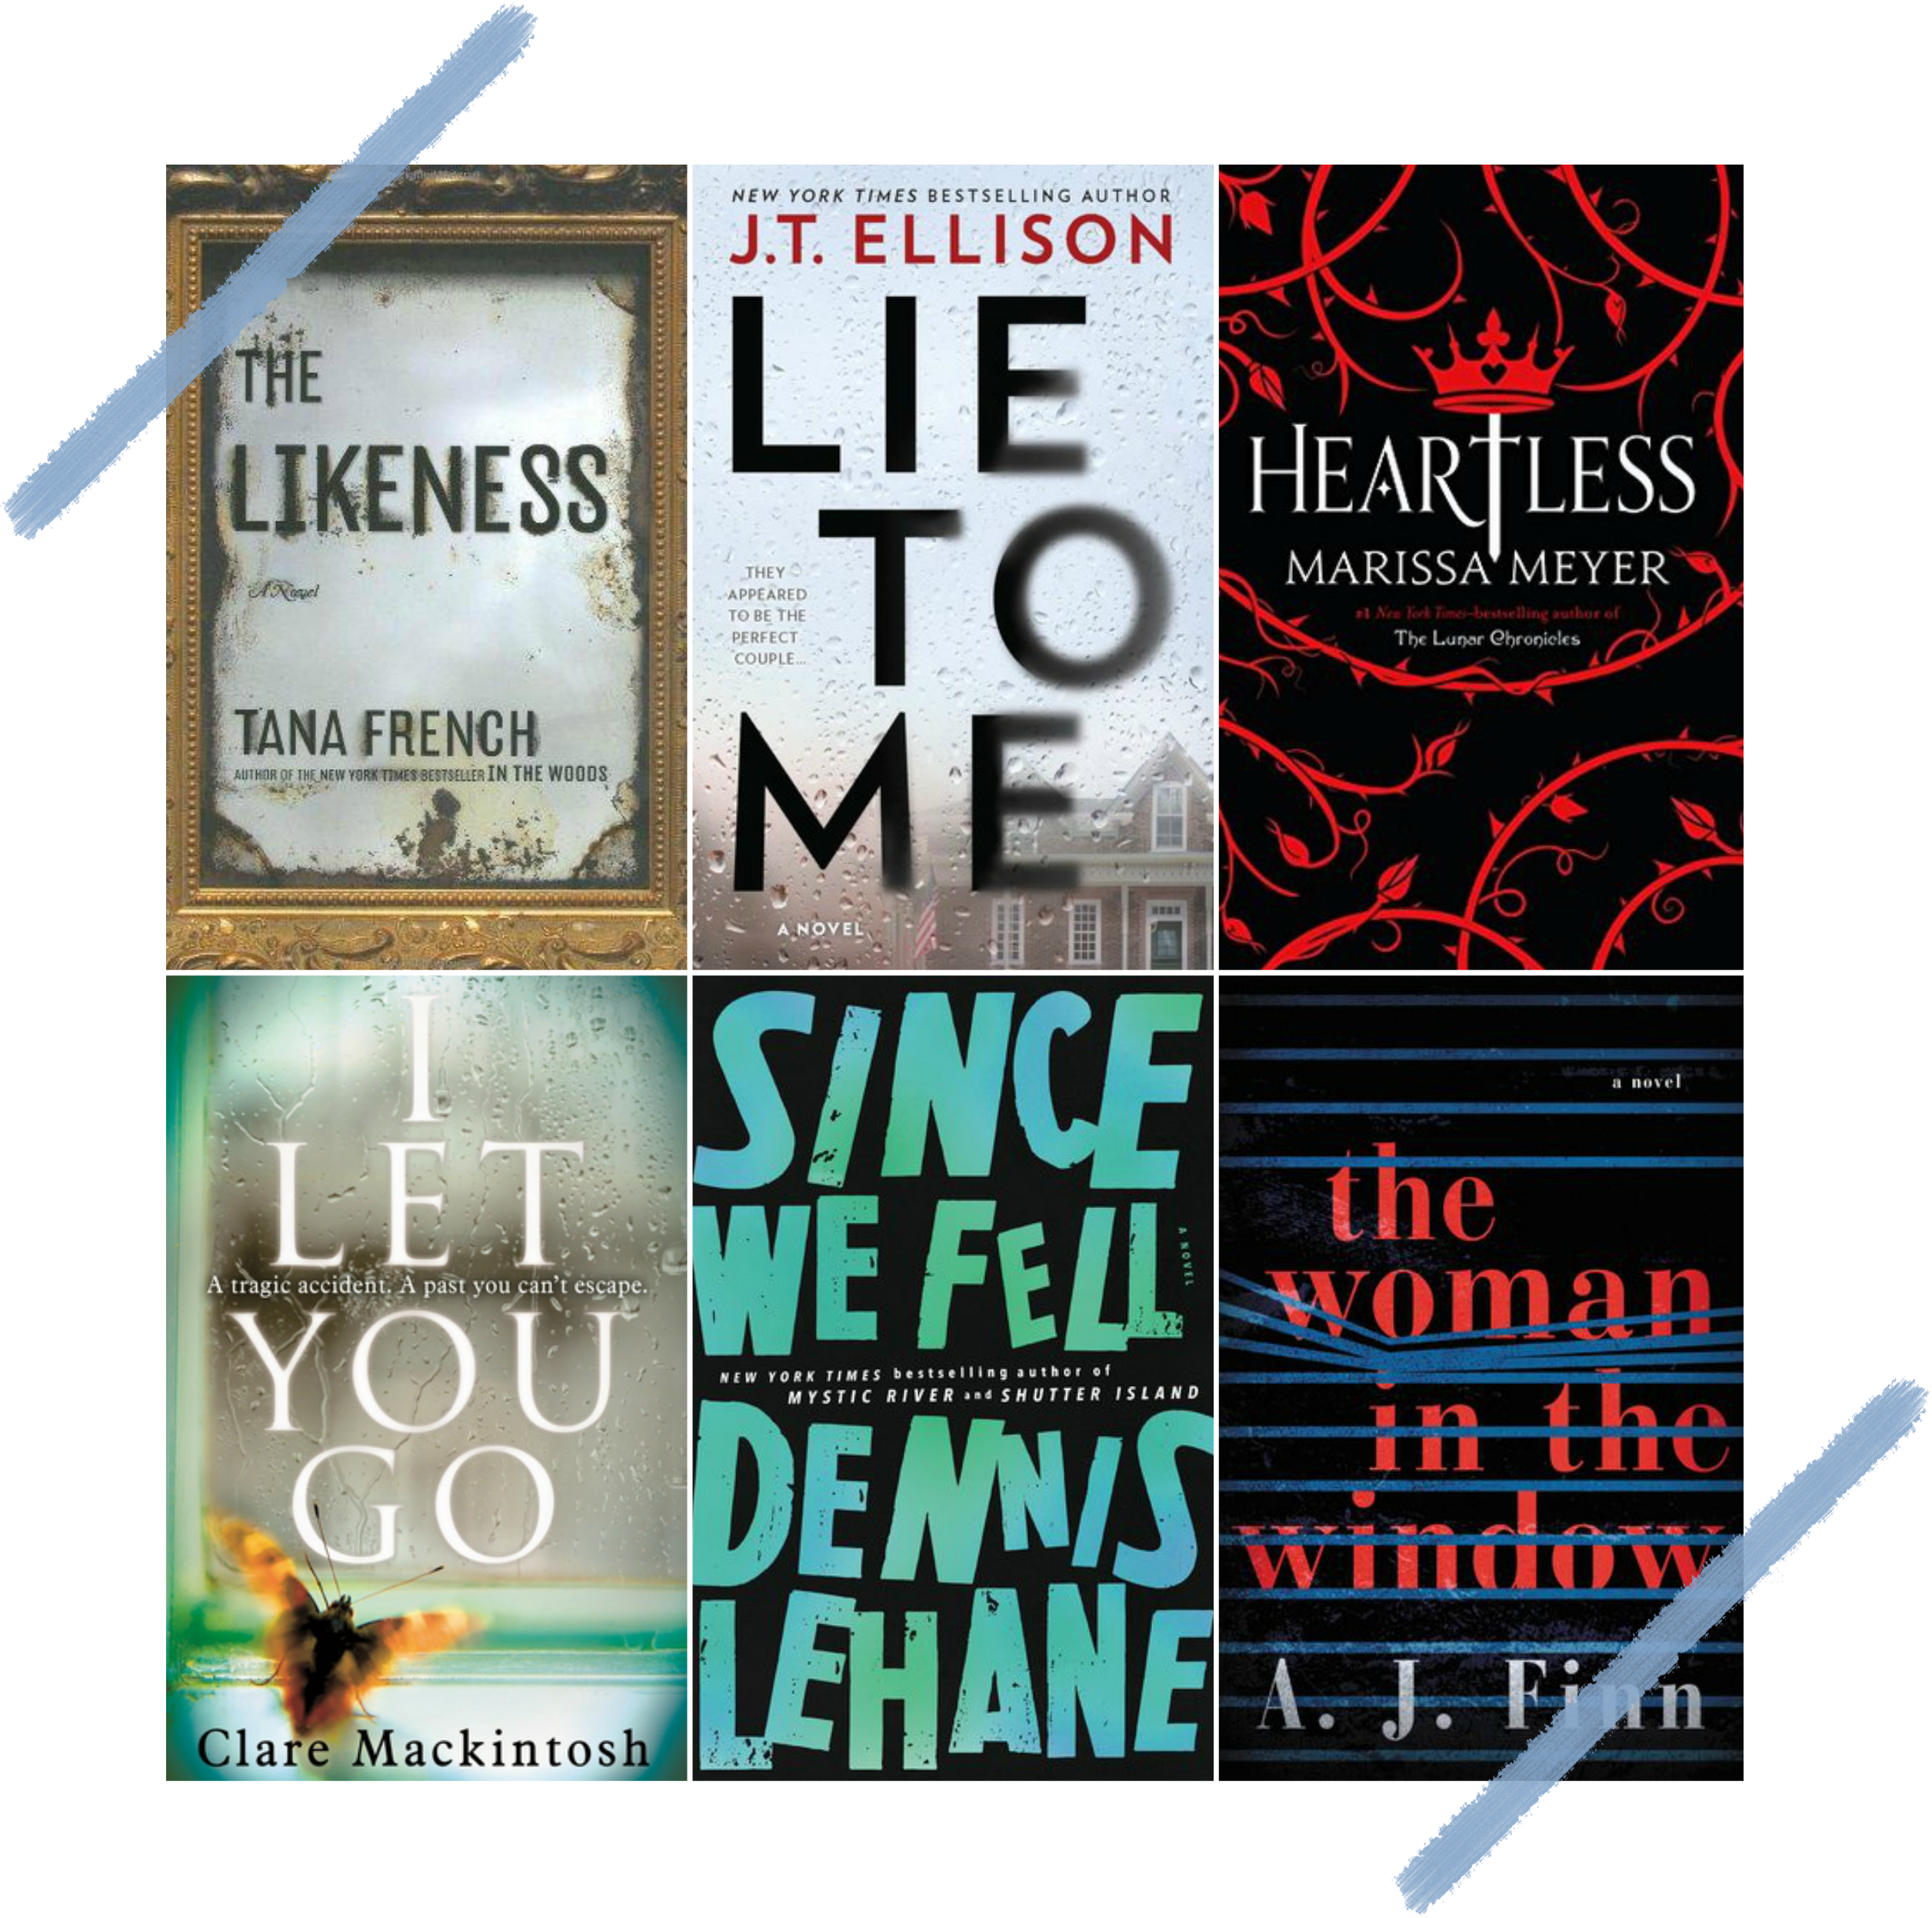 The Likeness Review, Book Reviews, Heartless, Lie to Me, I Let You Go, The Woman in the Window Review, Since We Fell